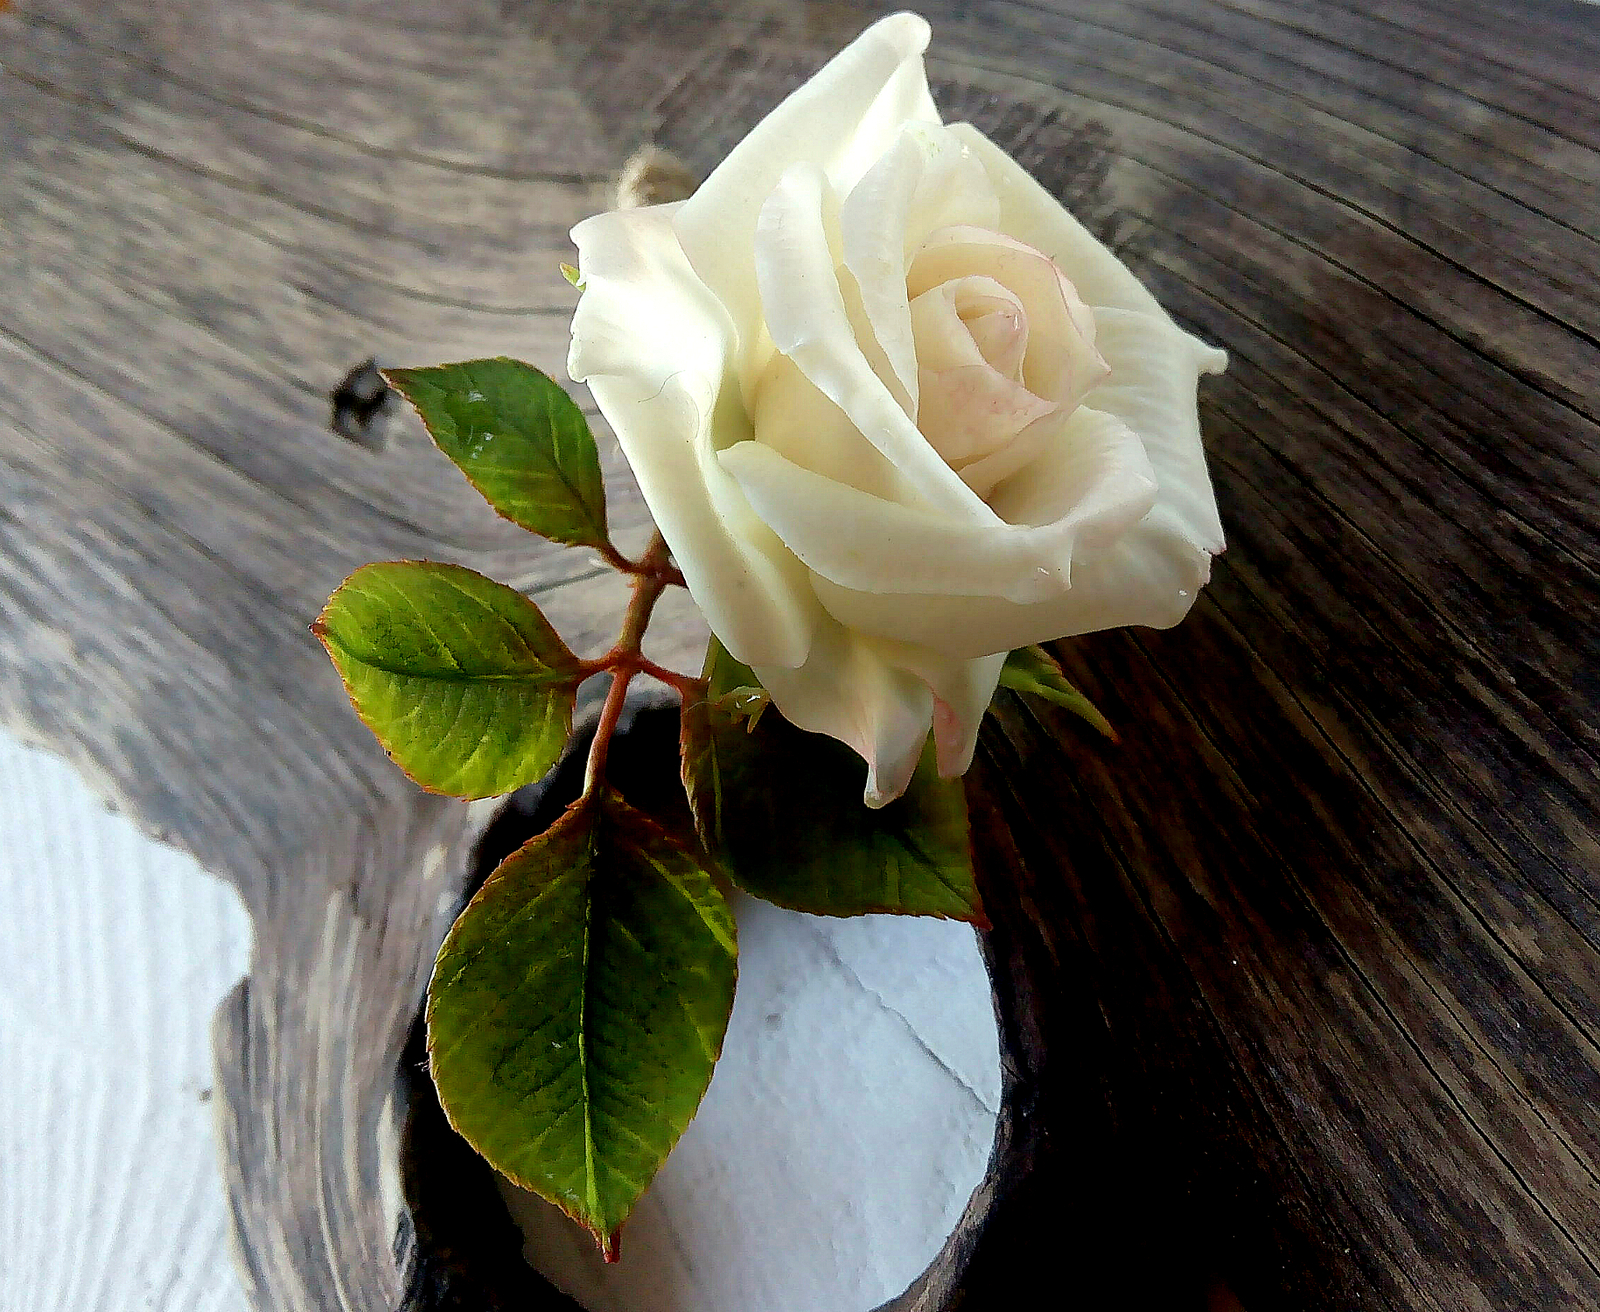 Rose brooch made of polymer clay. - Polymer clay, , Cold porcelain, the Rose, Handmade, Brooch, Longpost